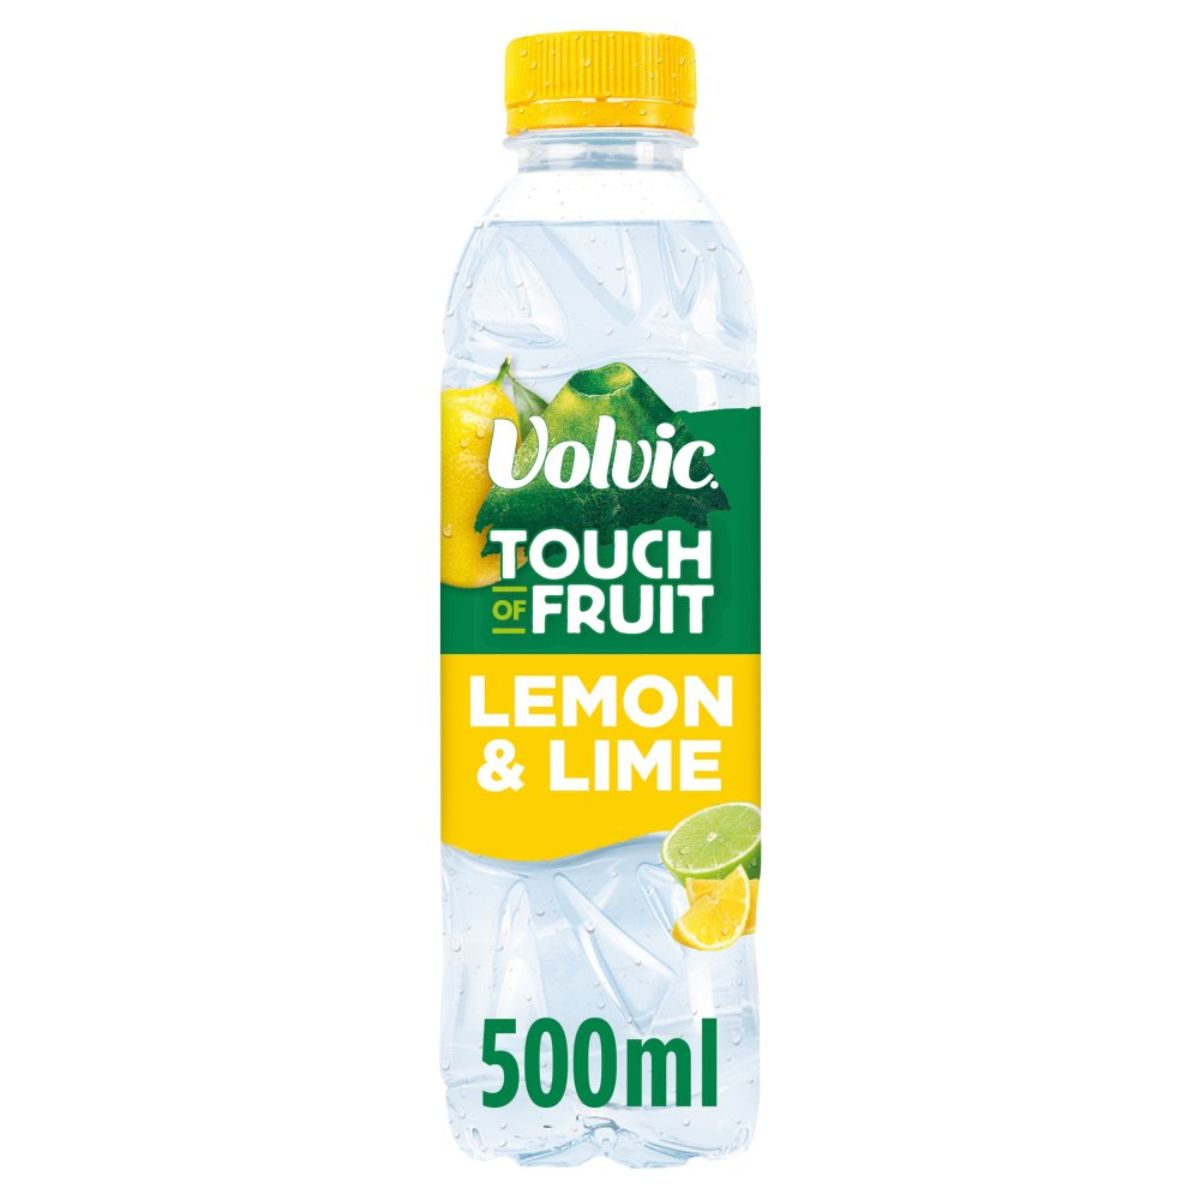 A Volvic - Touch of Fruit Lemon & Lime Flavoured Water - 500ml bottle.